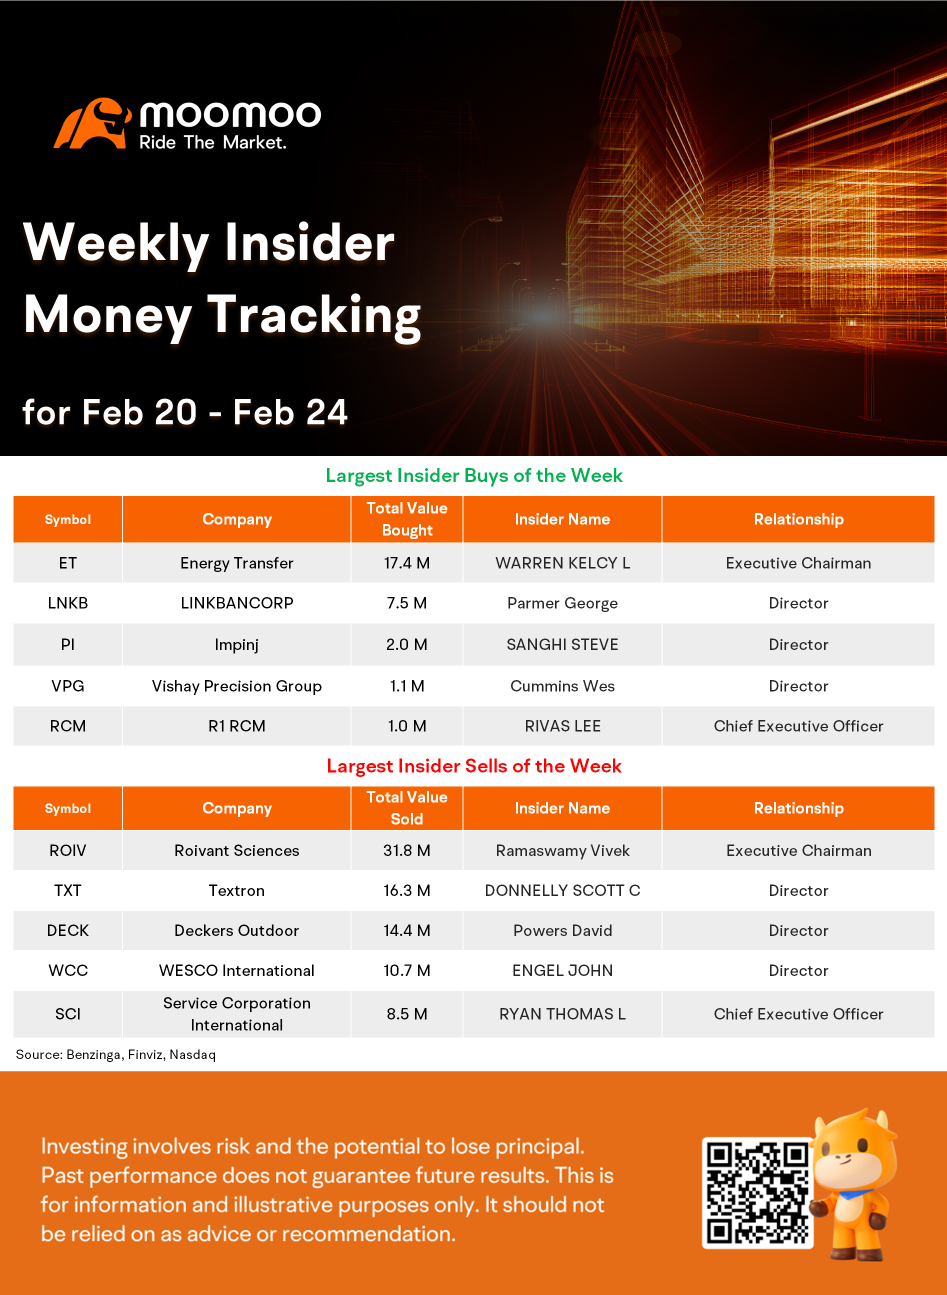 Weekly Insider Money Tracking: Consecutive buying of ET and dumping of ROIV